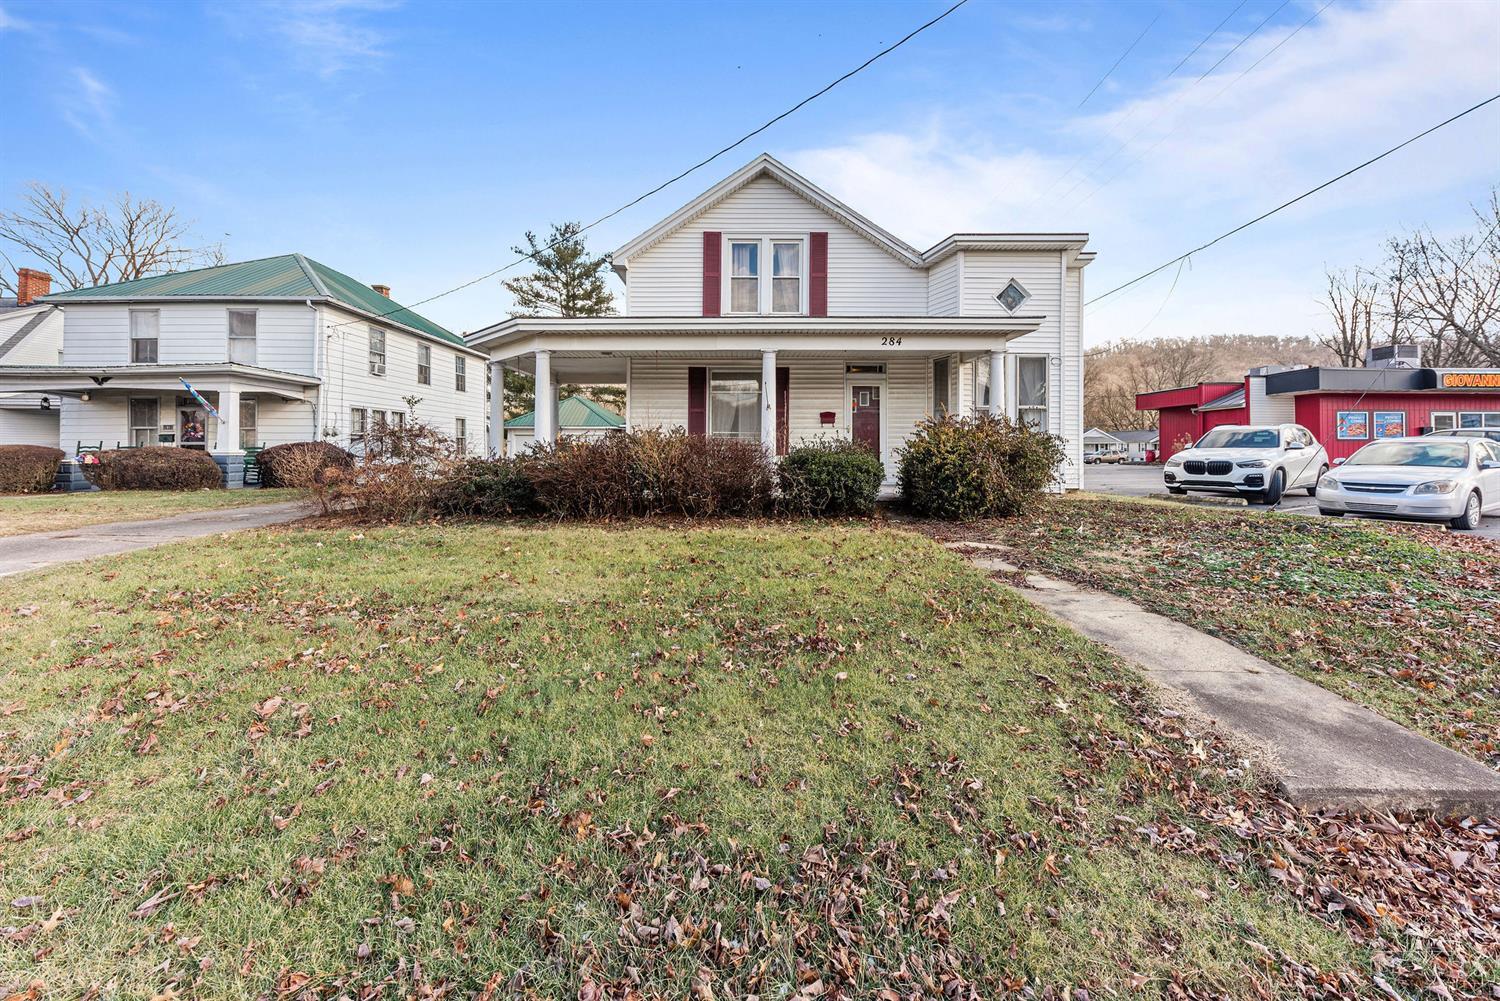 284 S 2nd St, Ripley, OH 45167